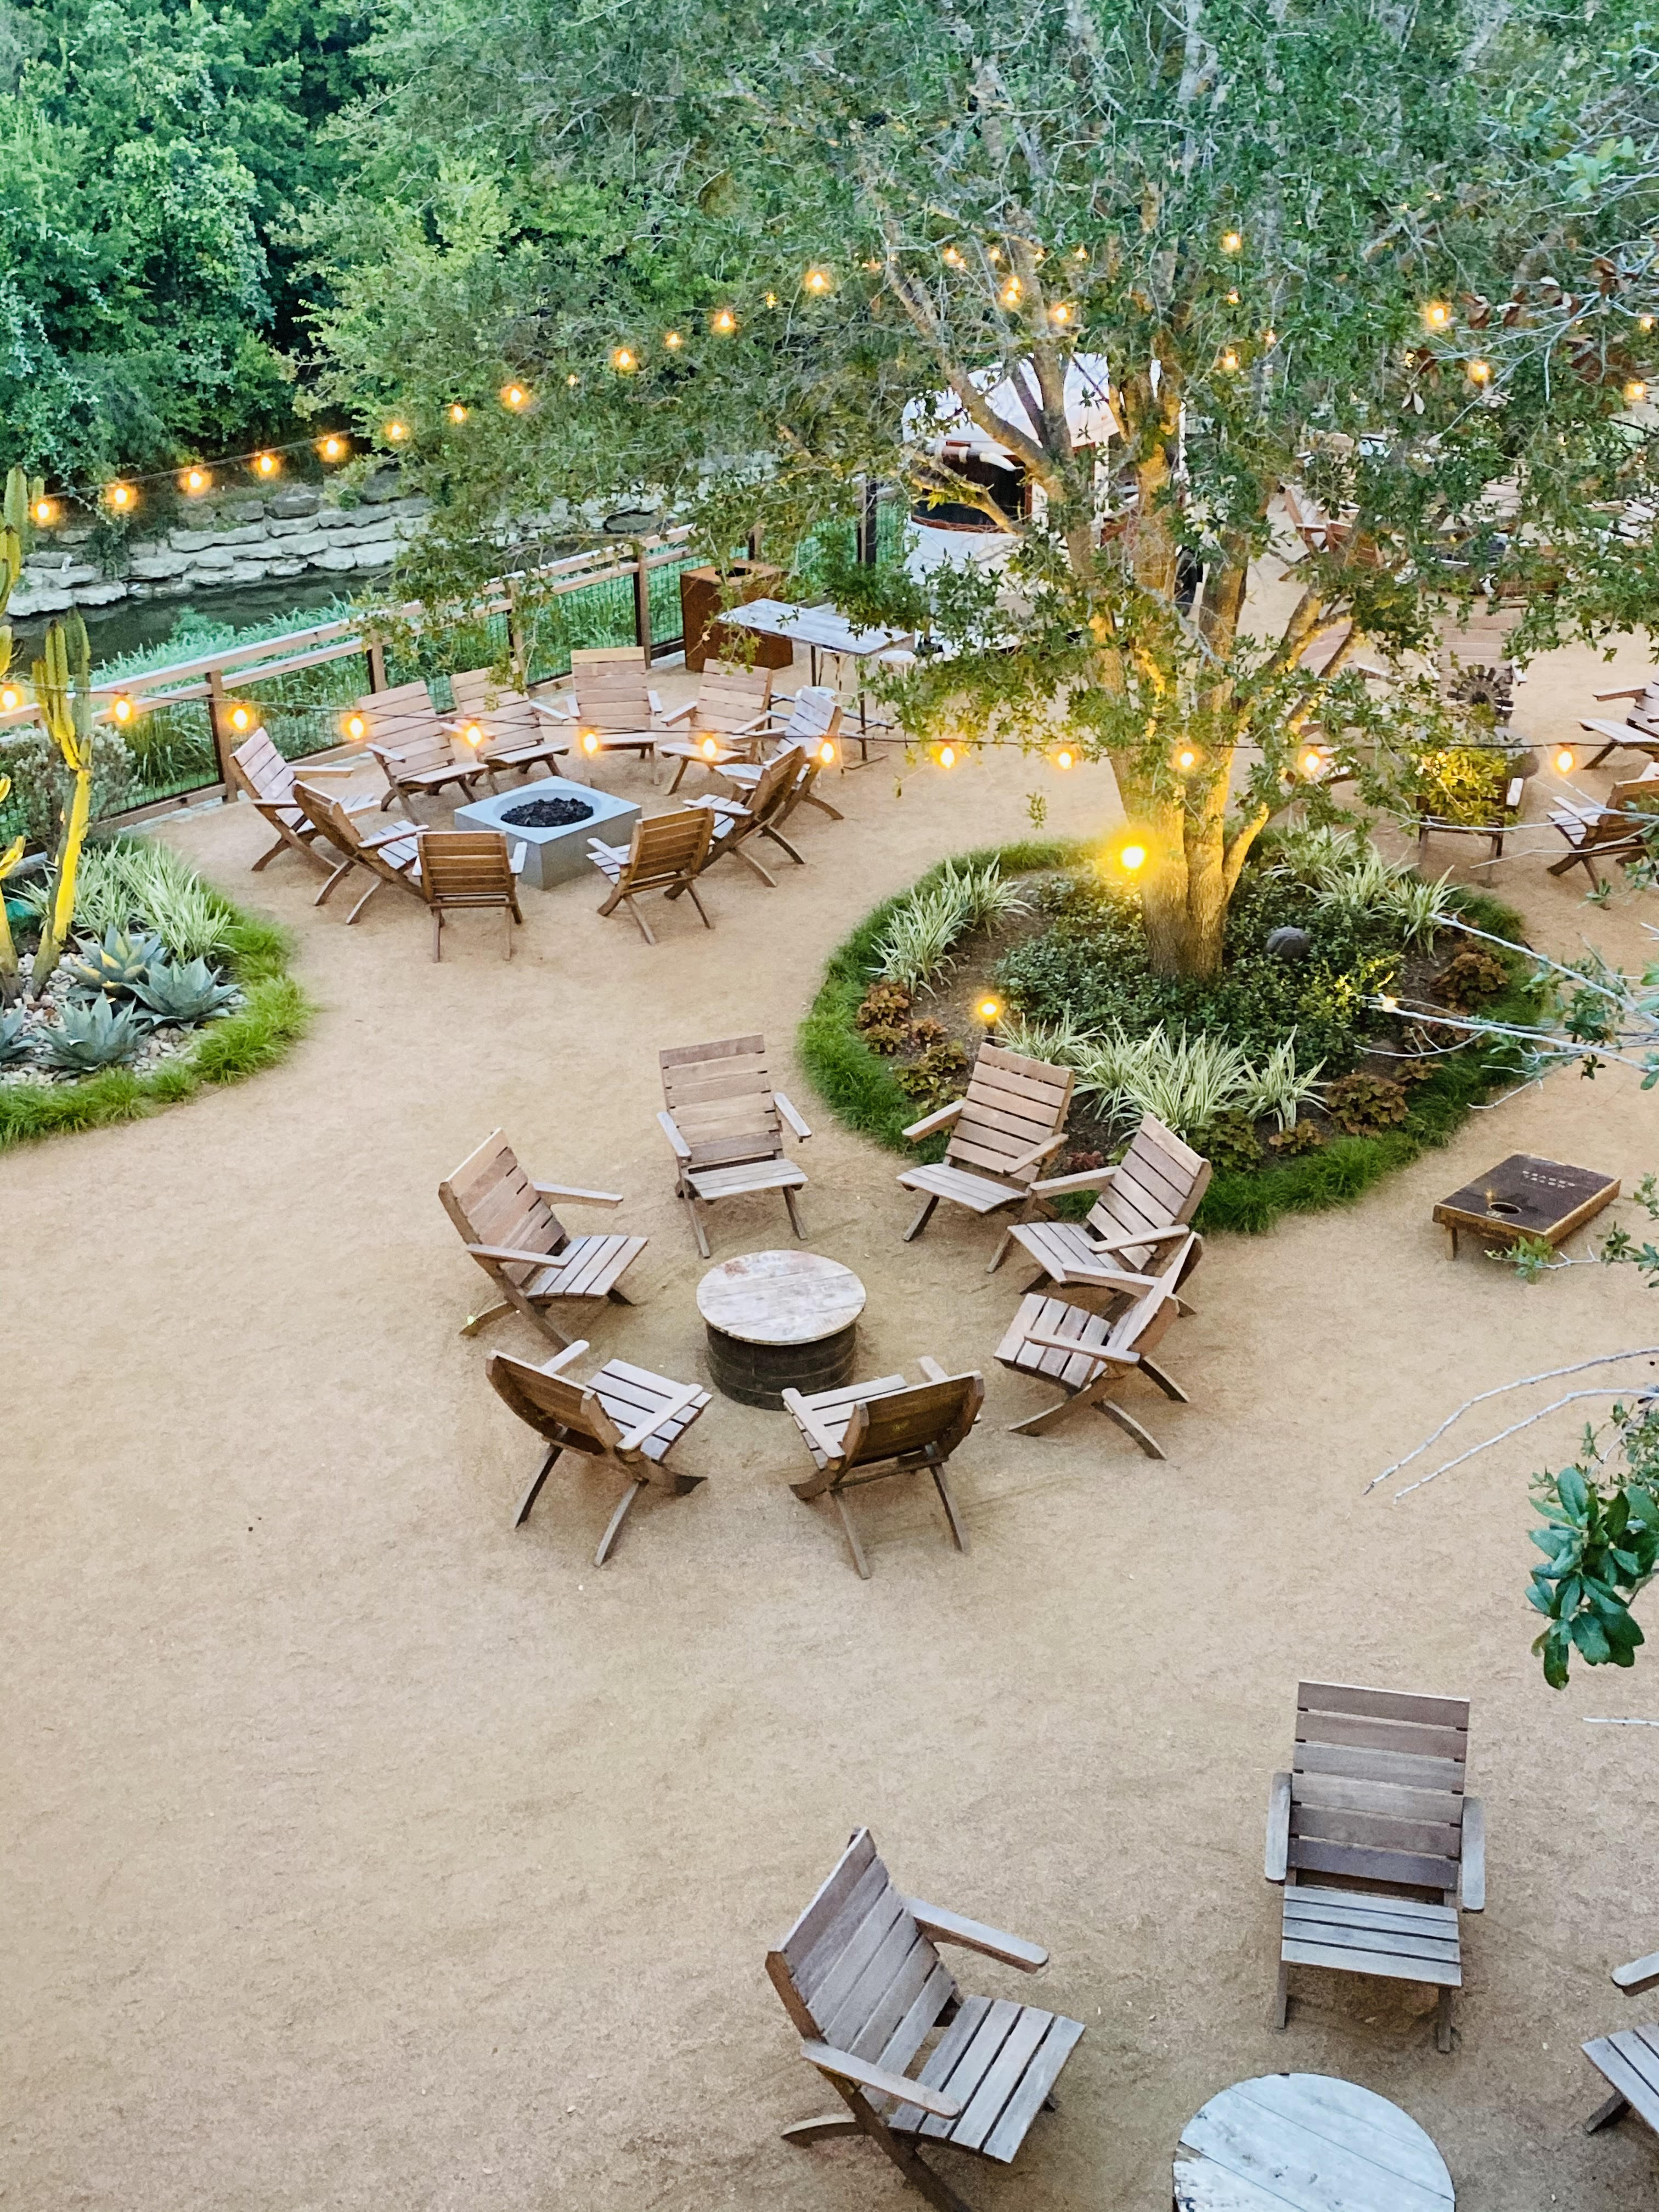 The Backyard at Hotel Drover, With food, craft cocktails, cold beer, live music and smores